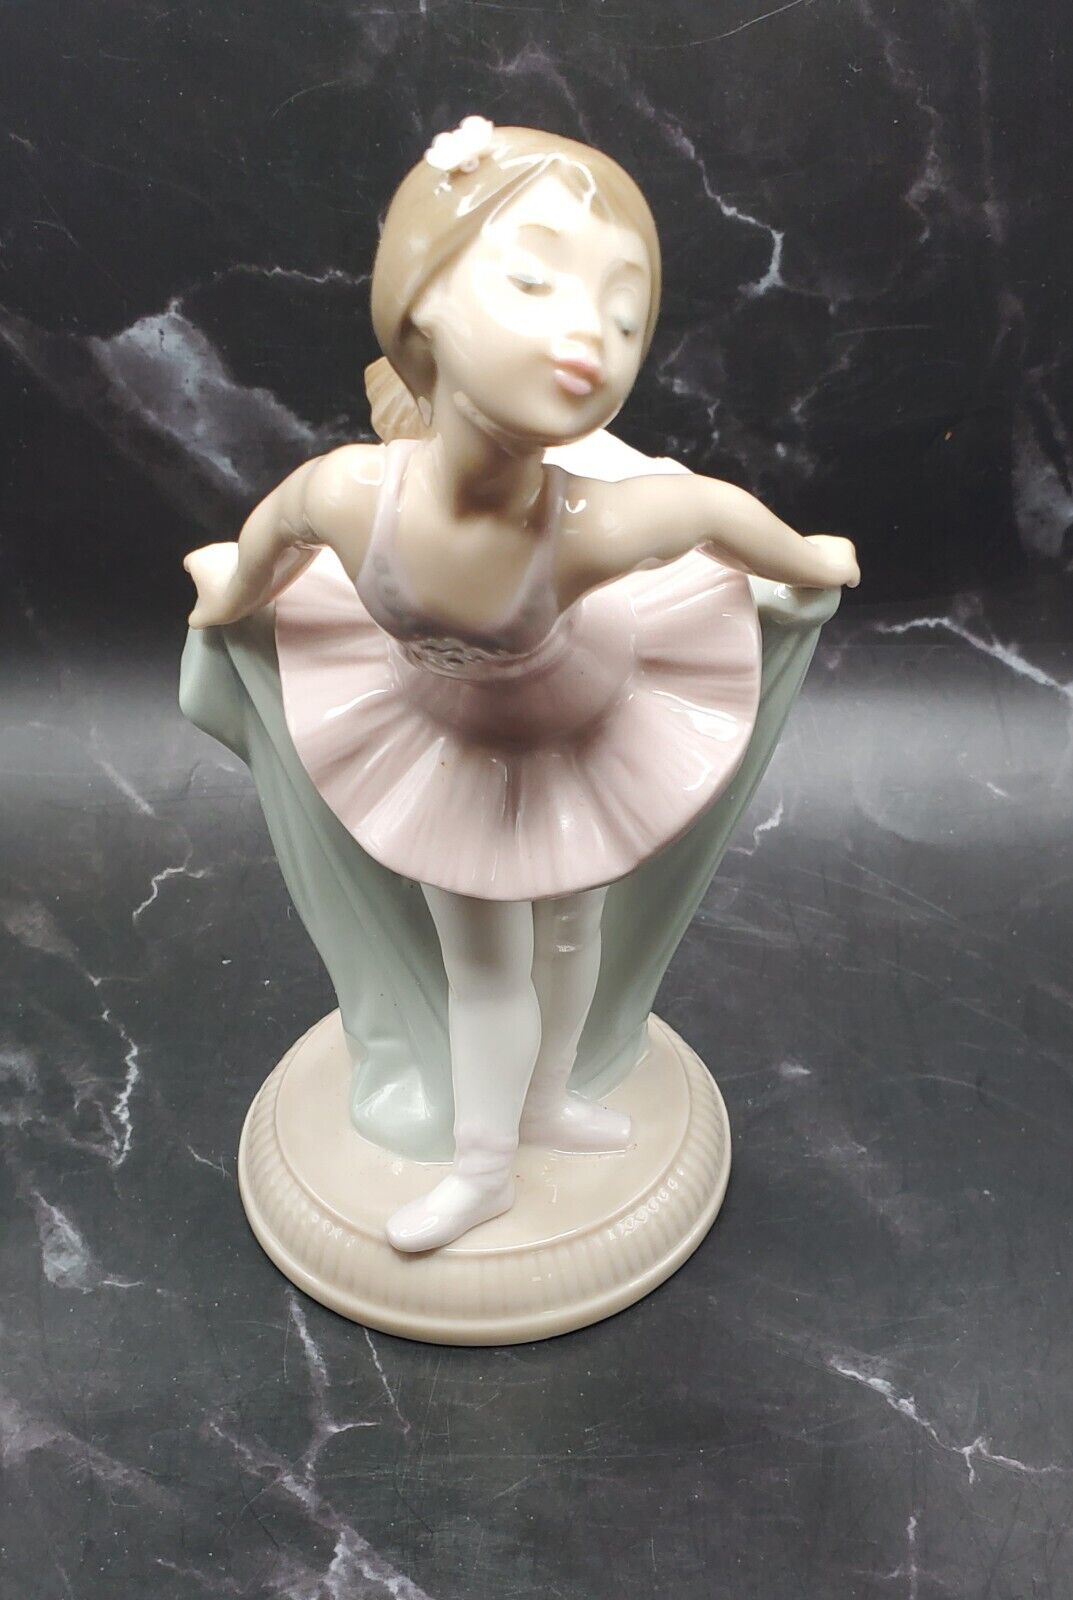 Vintage 1990's NAO Ballerina Porcelain Figurine Hand Made in Spain by Lladró